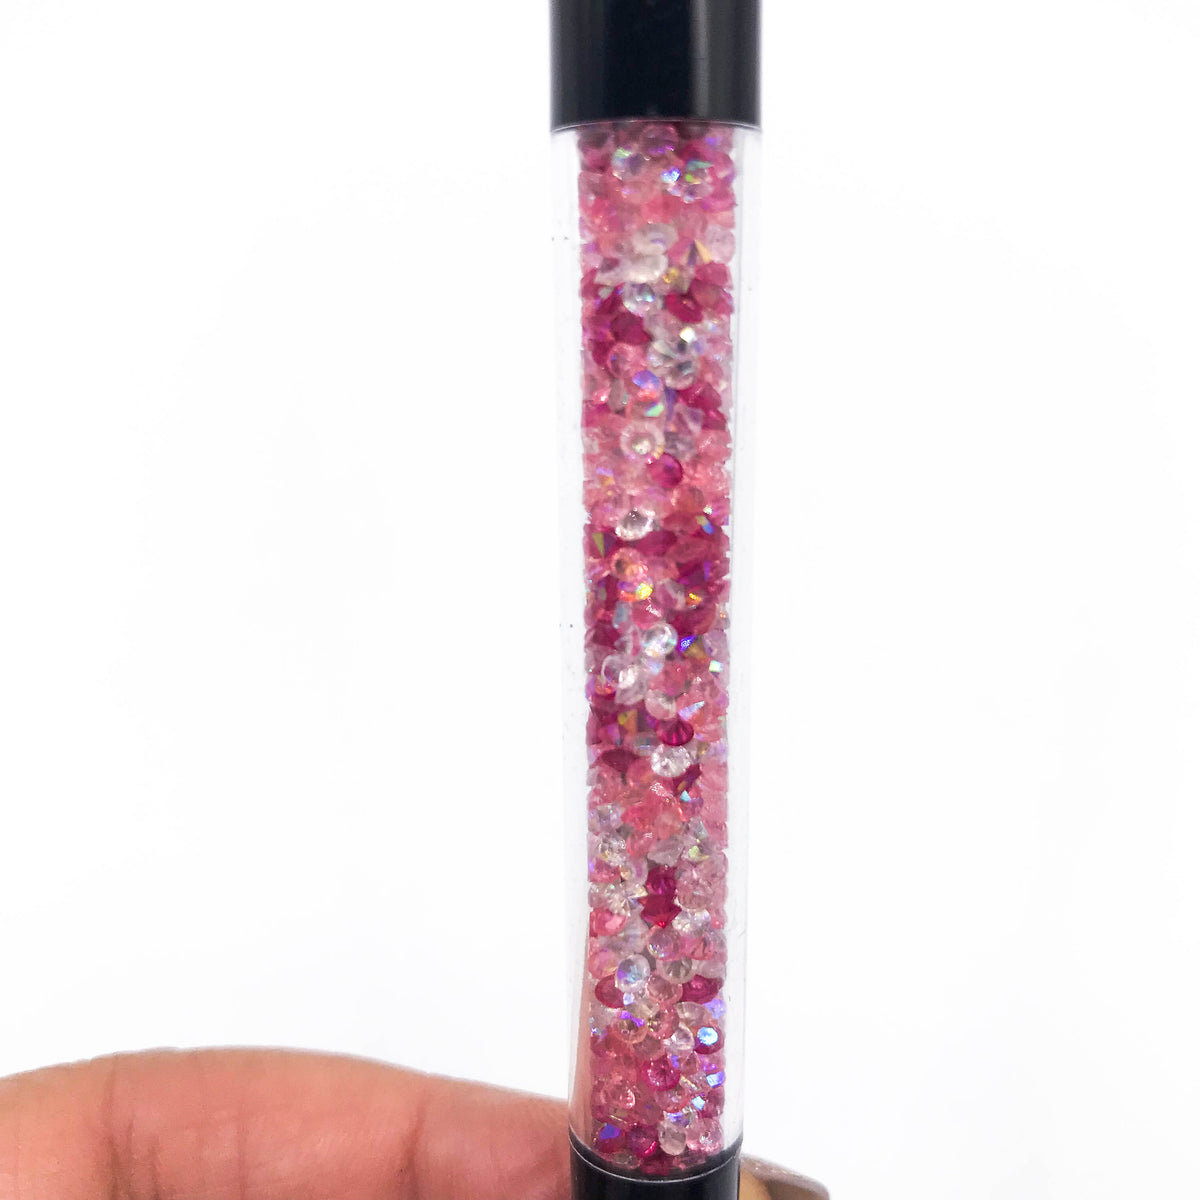 Girls Night Out Crystal Collab VBPen | limited